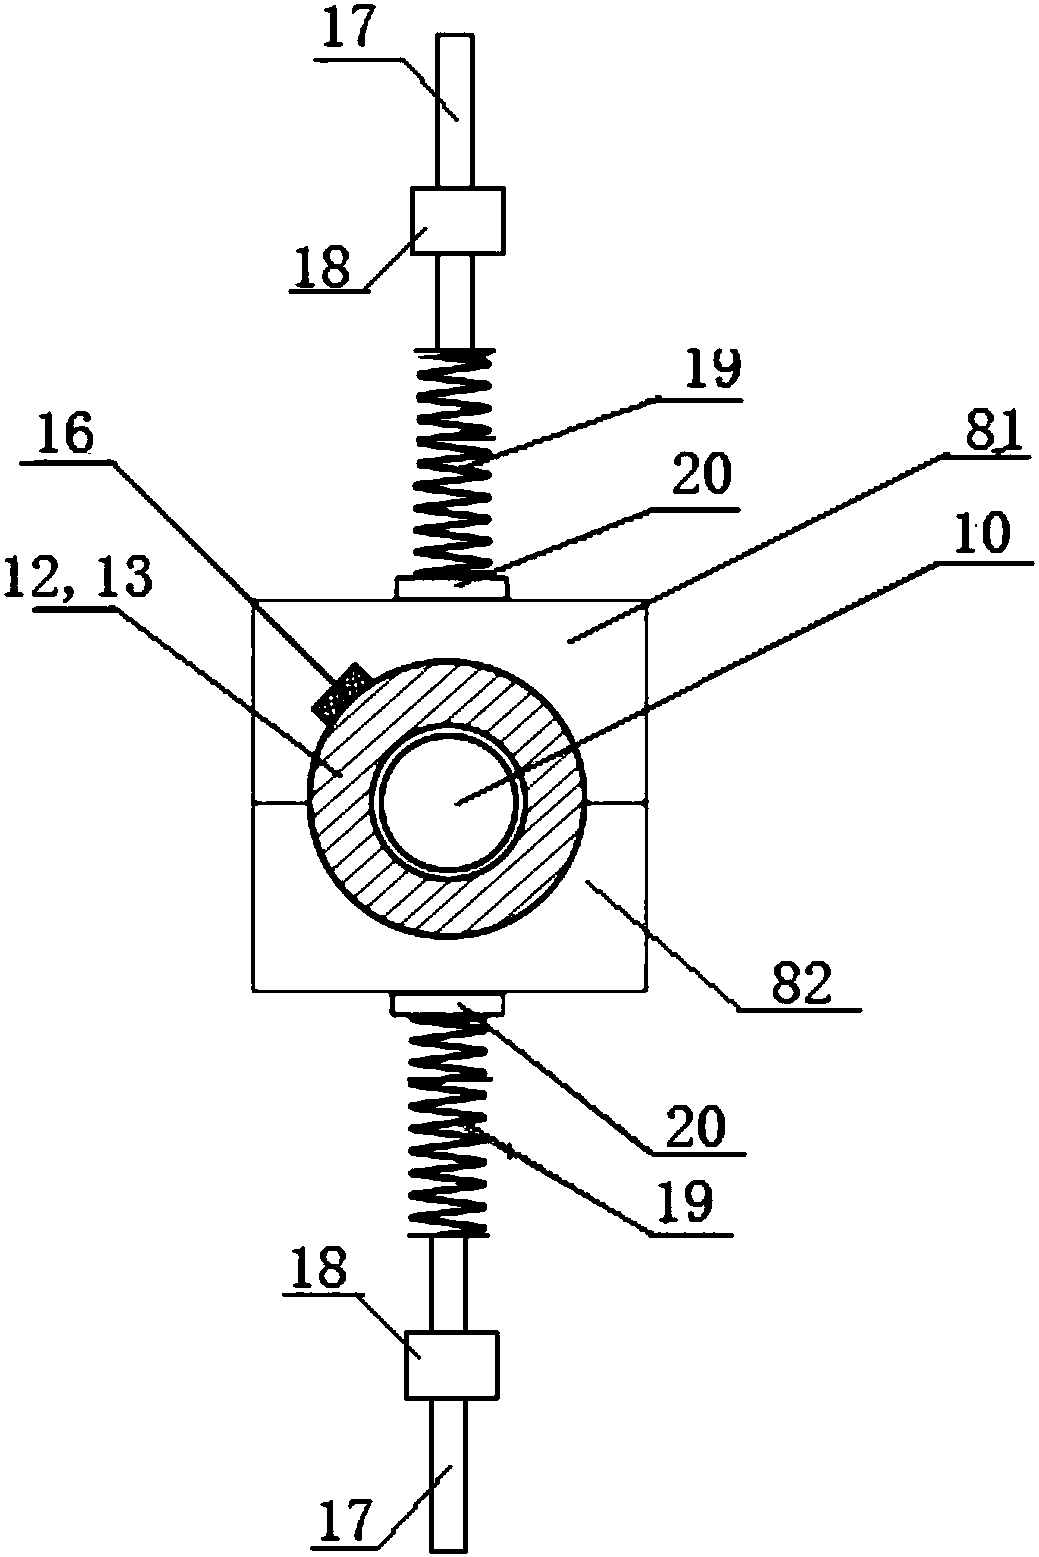 Rolling bearing fatigue life testing device capable of loading alternating load